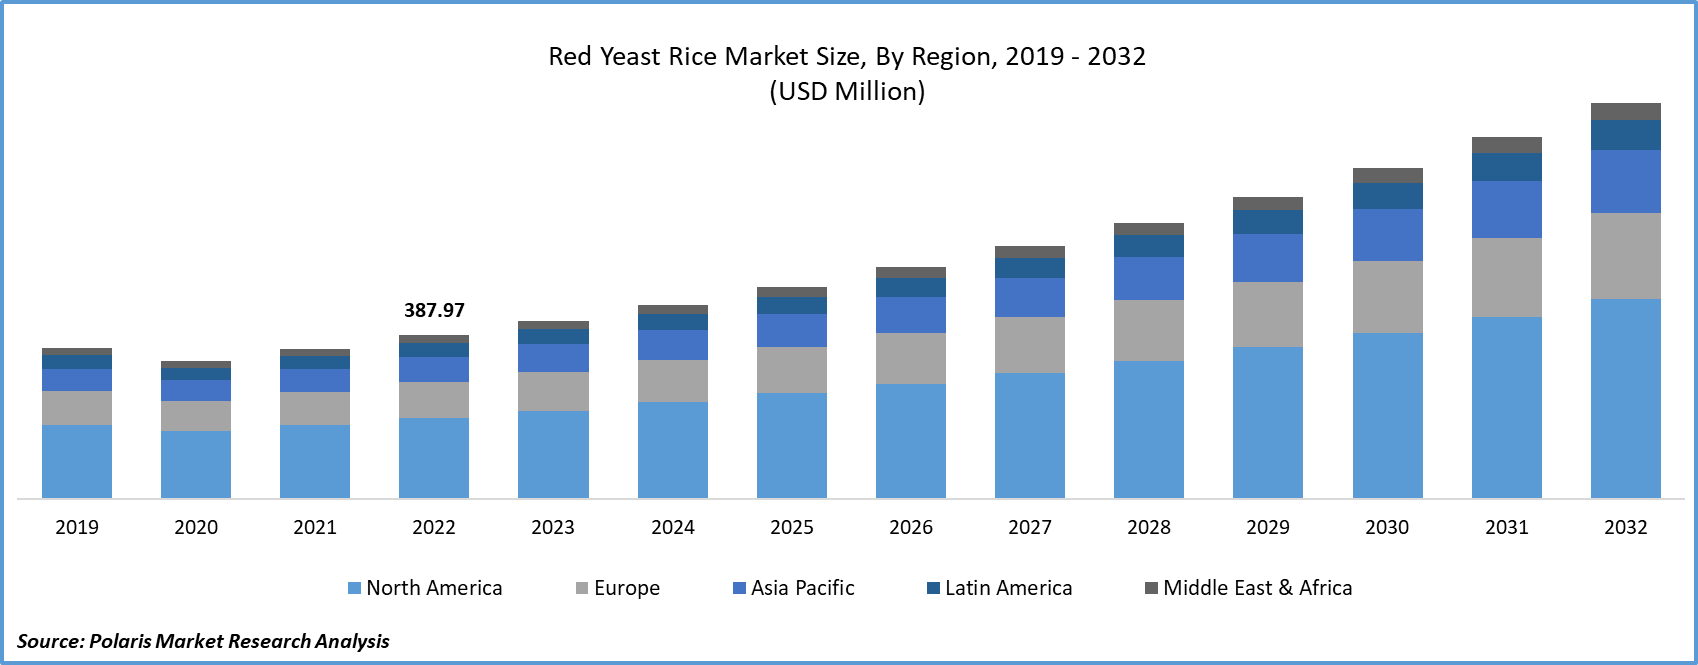 Red Yeast Rice Market Size